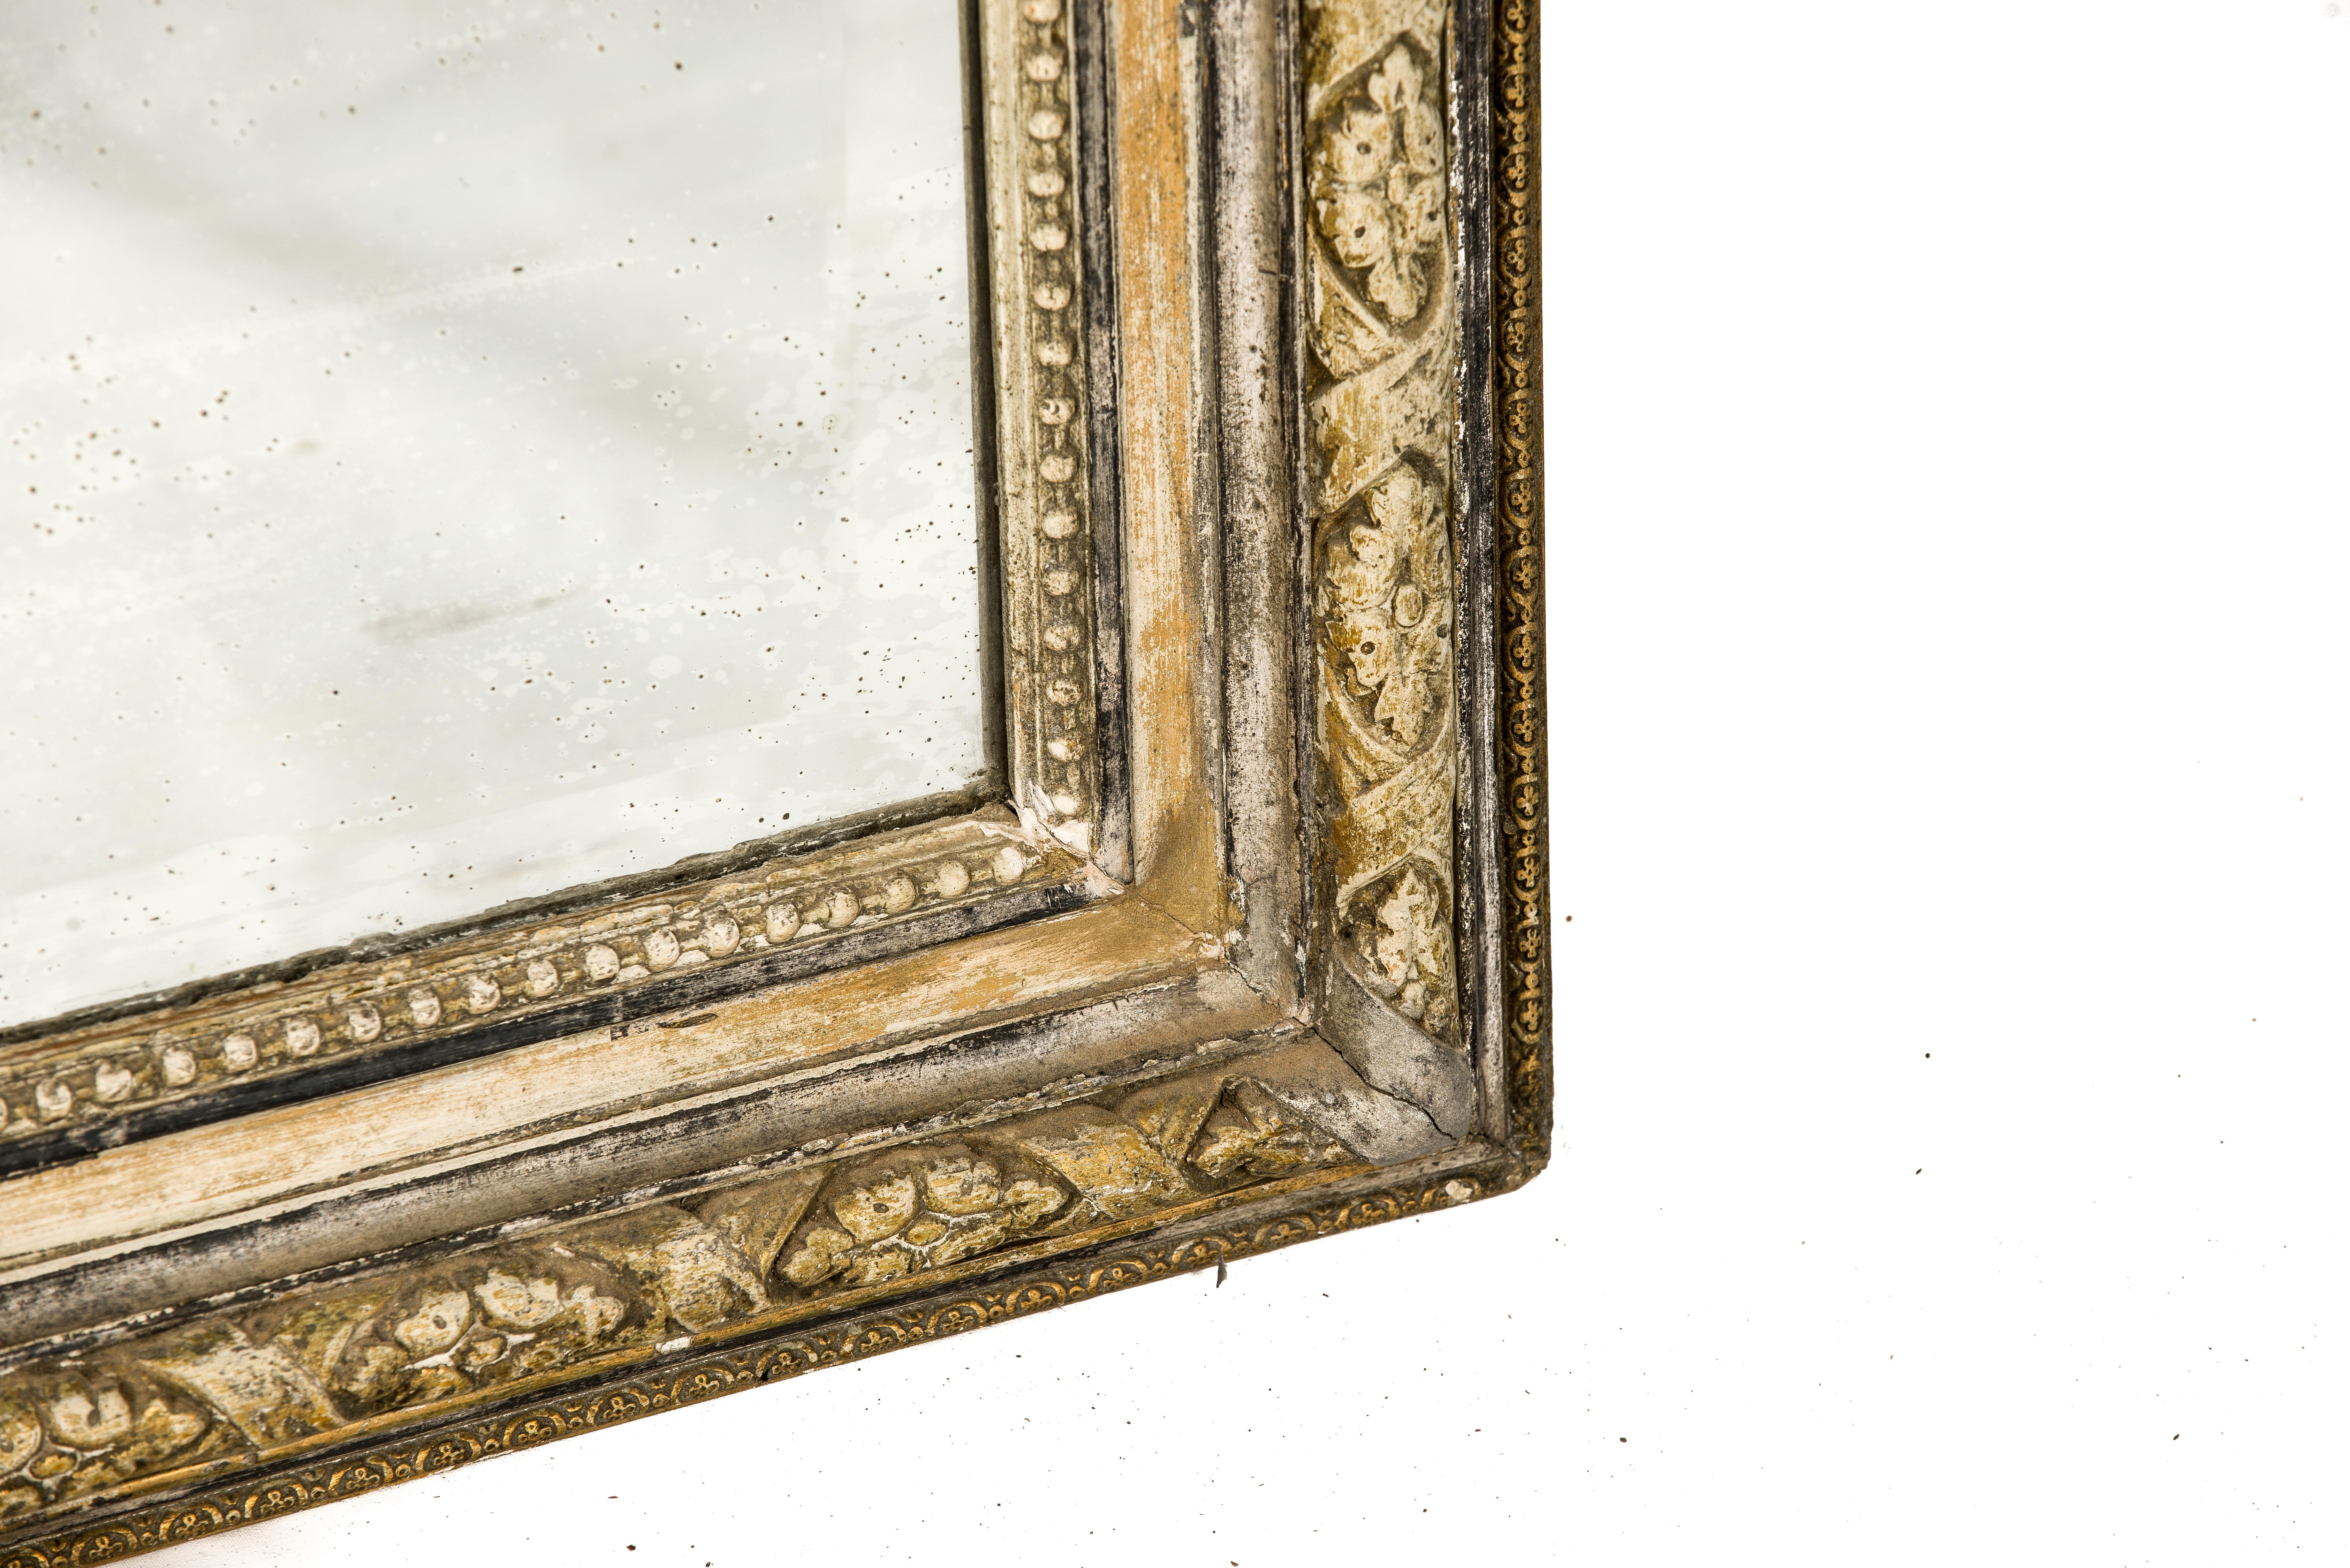 Antique French Silver and Gold Leaf Louis Seize Mirror with Floral Garlands For Sale 3